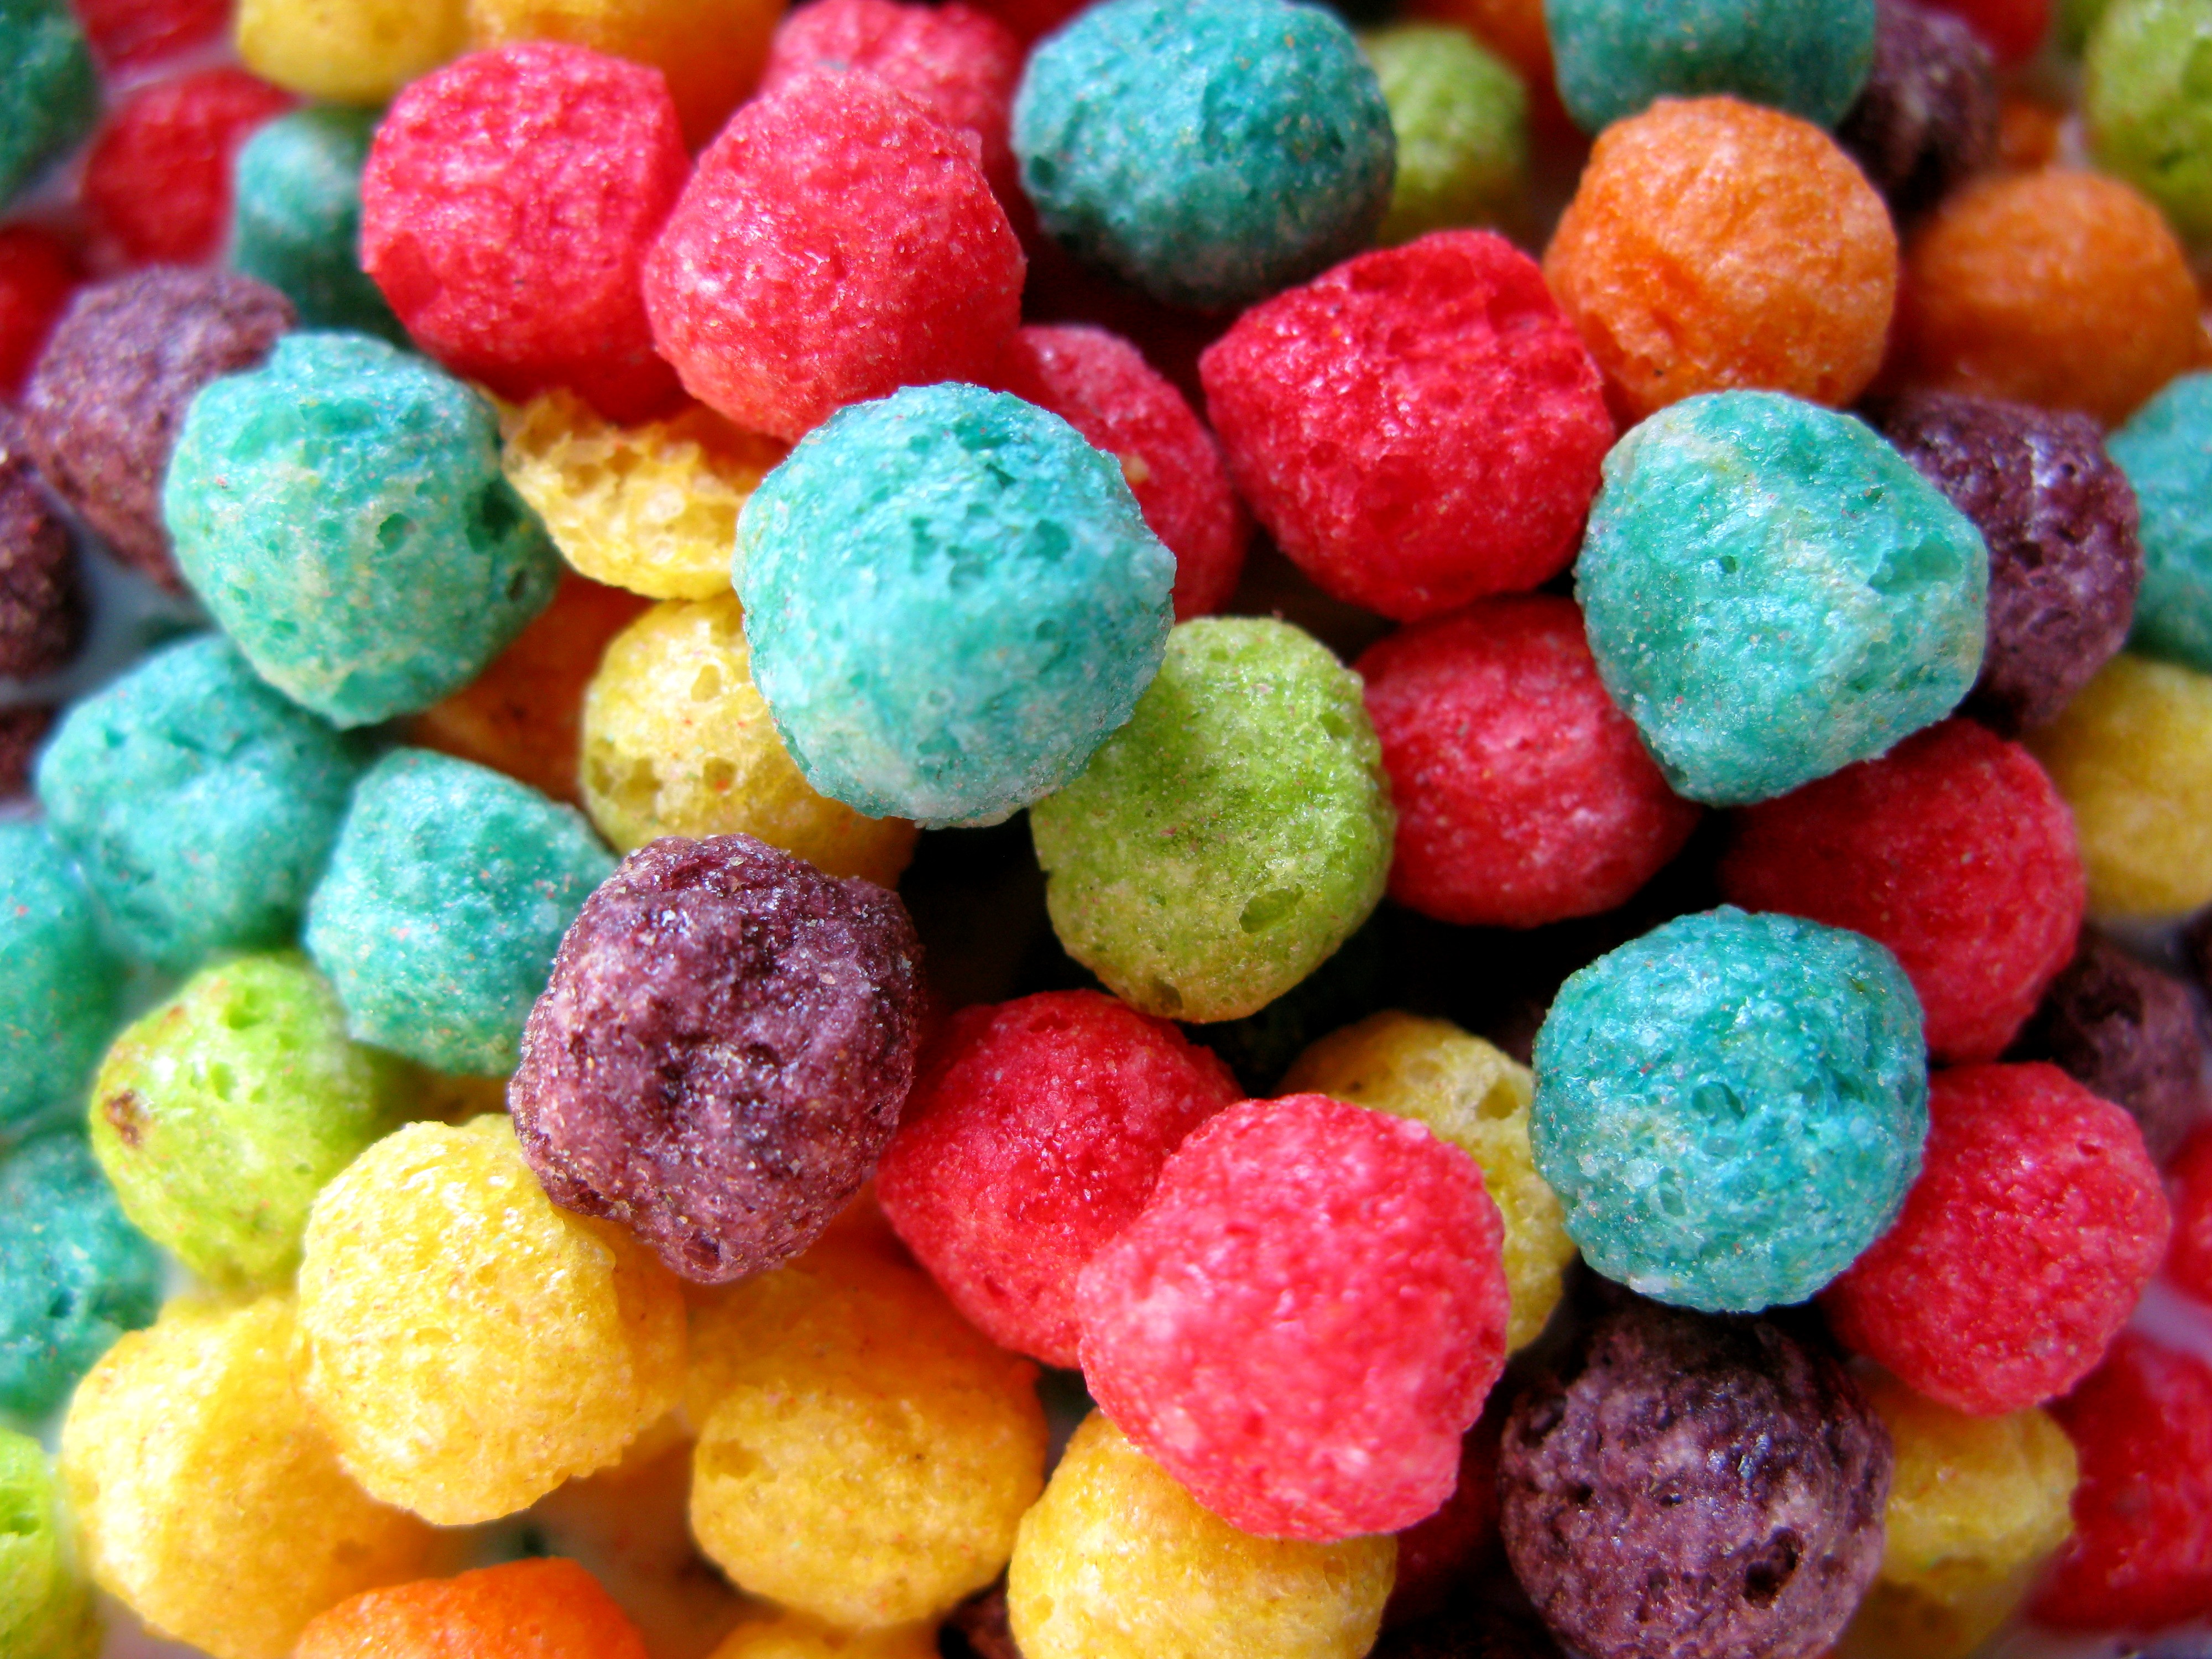 Free photo: Colorful Cereal, Blueberries, Cereal